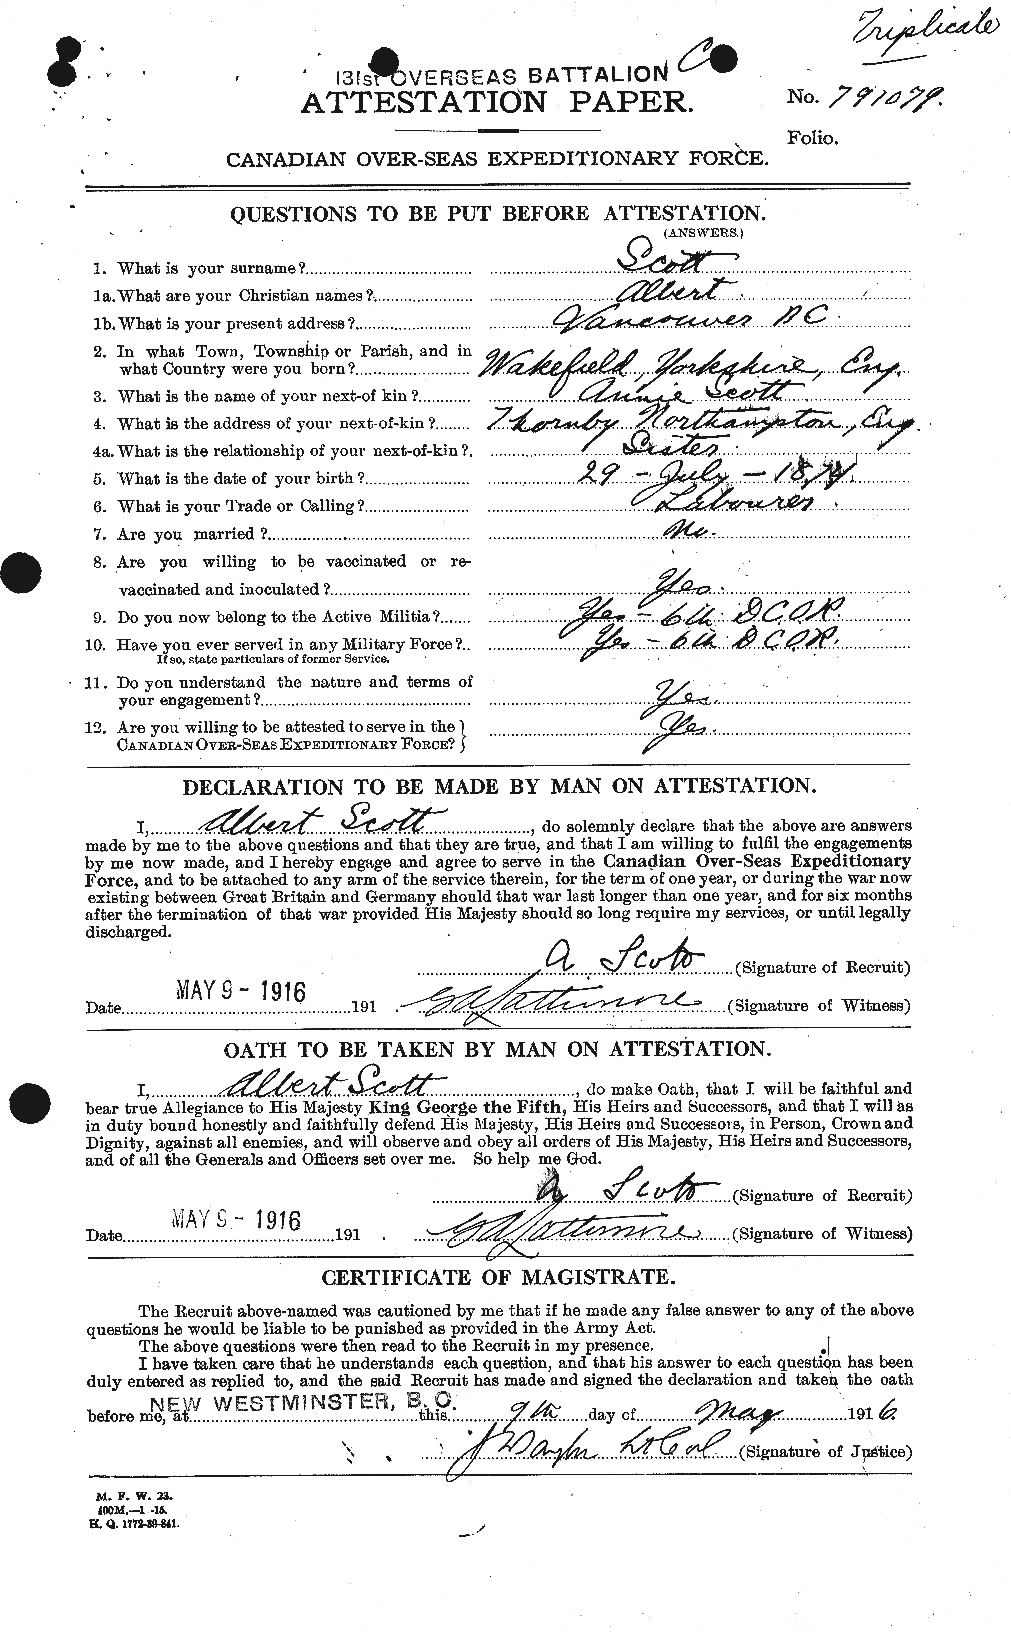 Personnel Records of the First World War - CEF 079283a